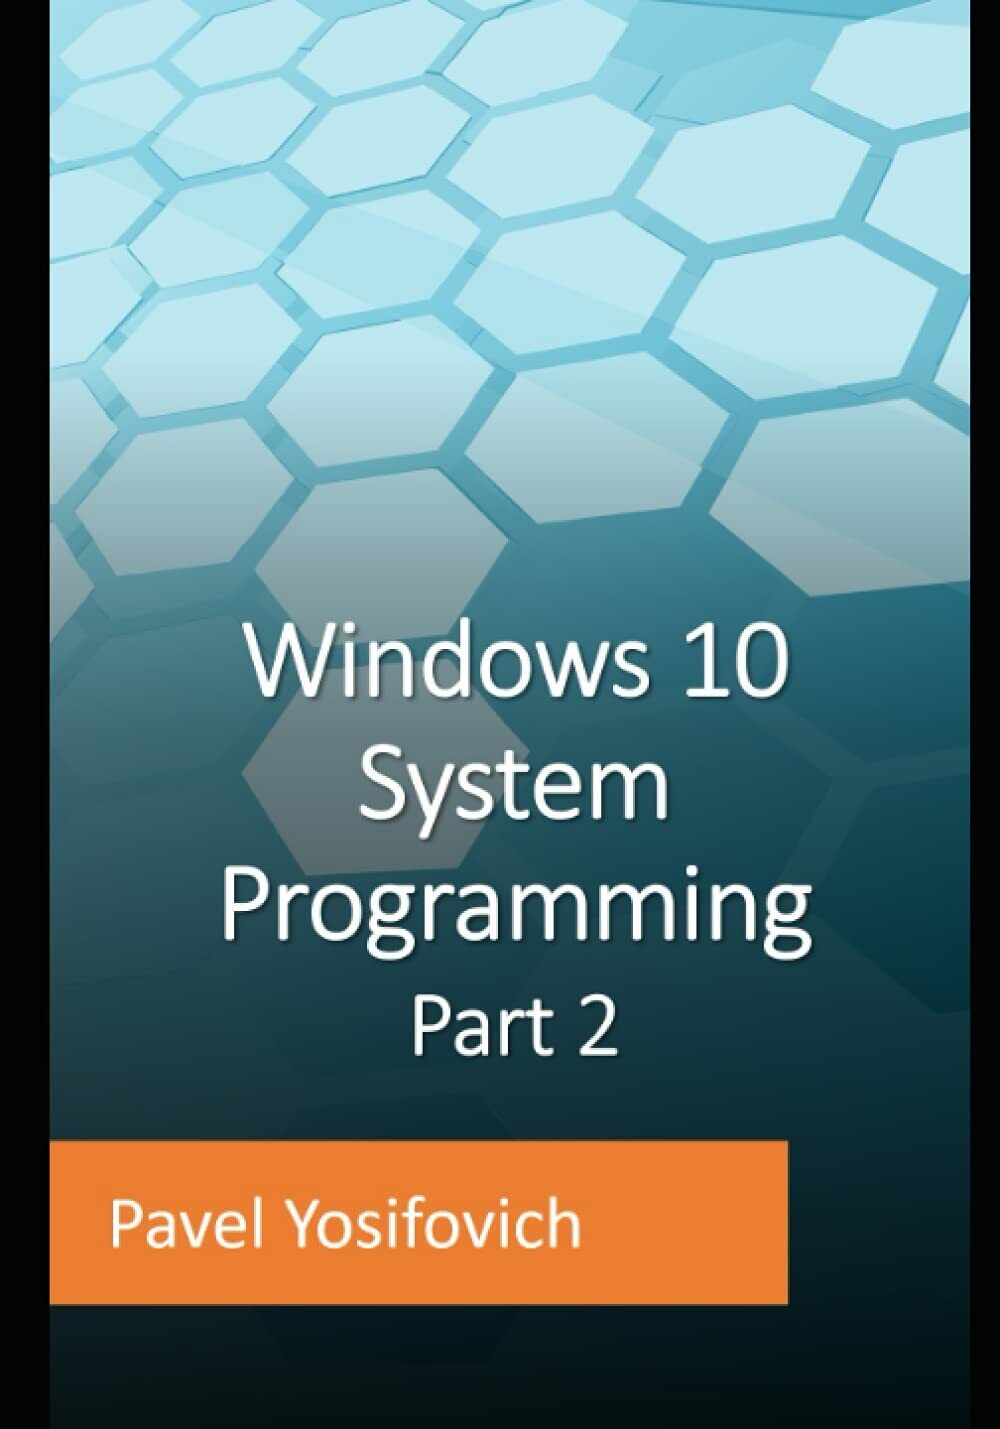 Windows 10 System Programming, Part 2 di Pavel Yosifovich,  2021,  Indipendently